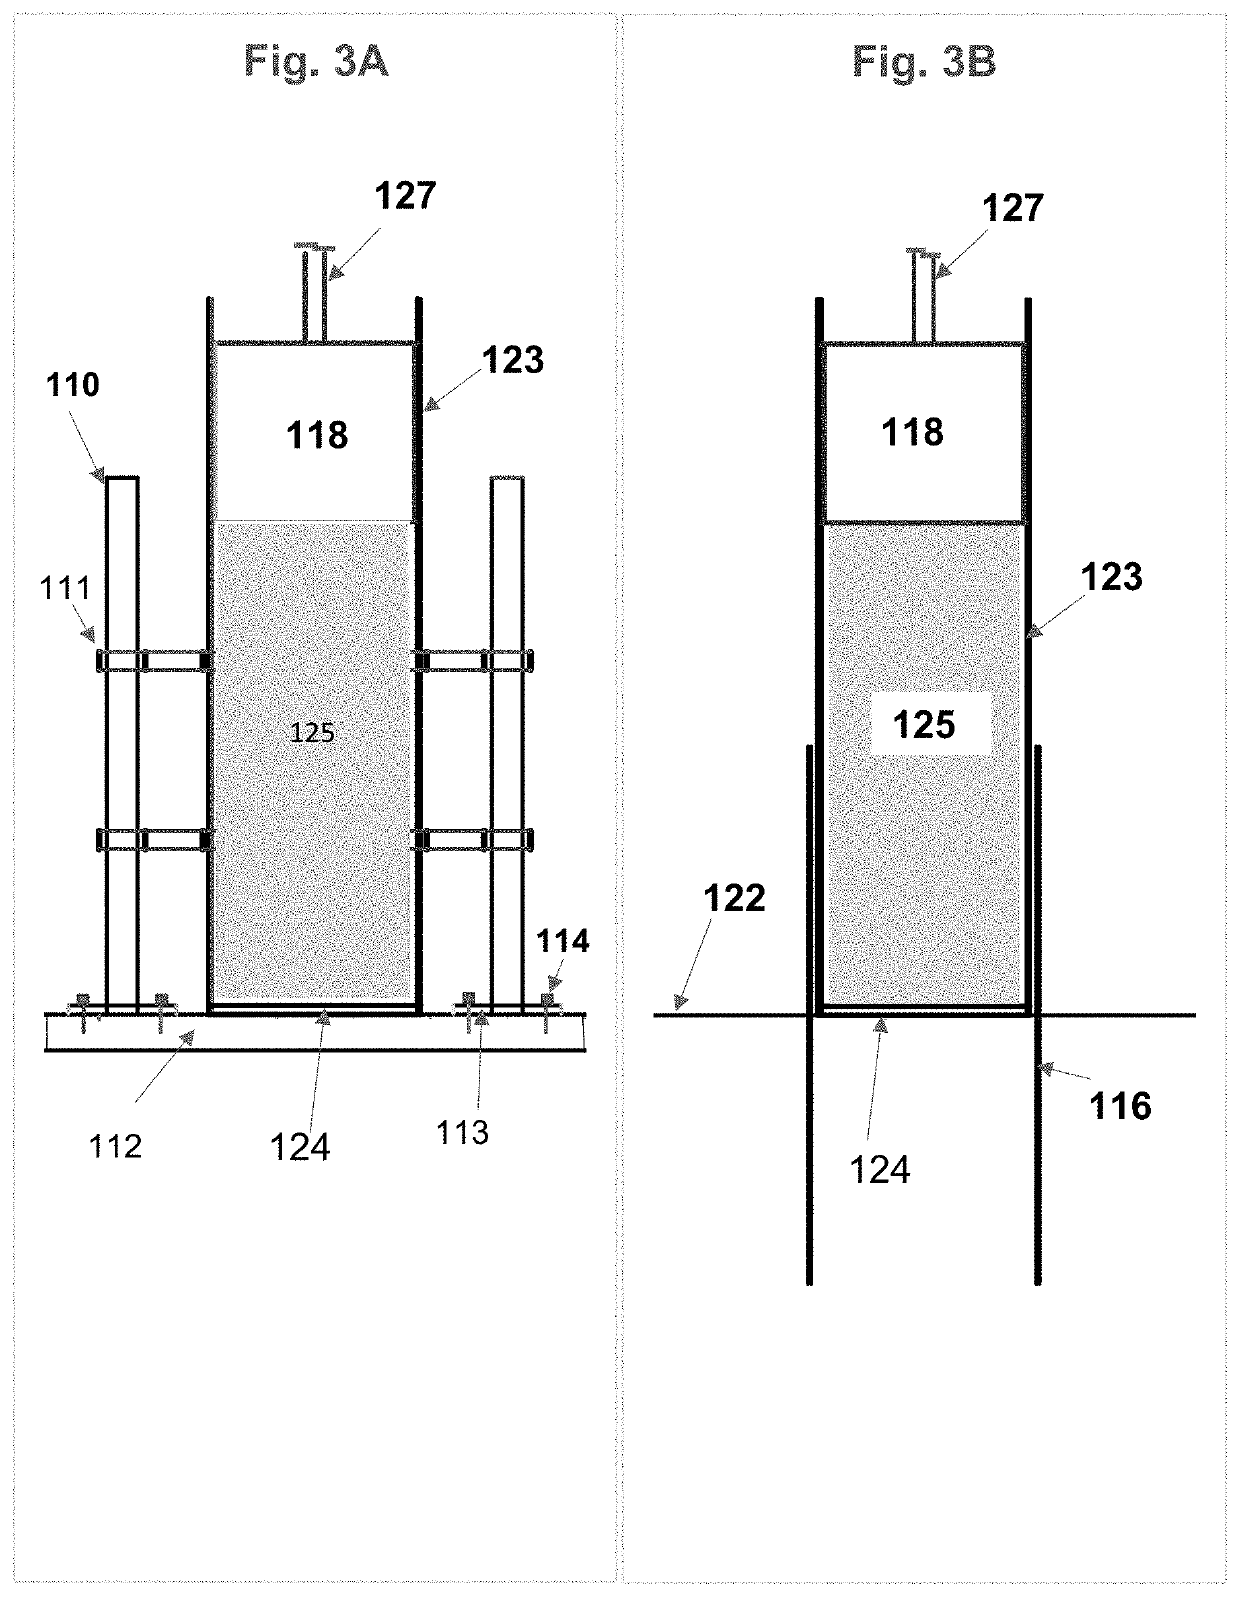 Rapid consolidation and compaction method for soil improvement of various layers of soils and intermediate geomaterials in a soil deposit